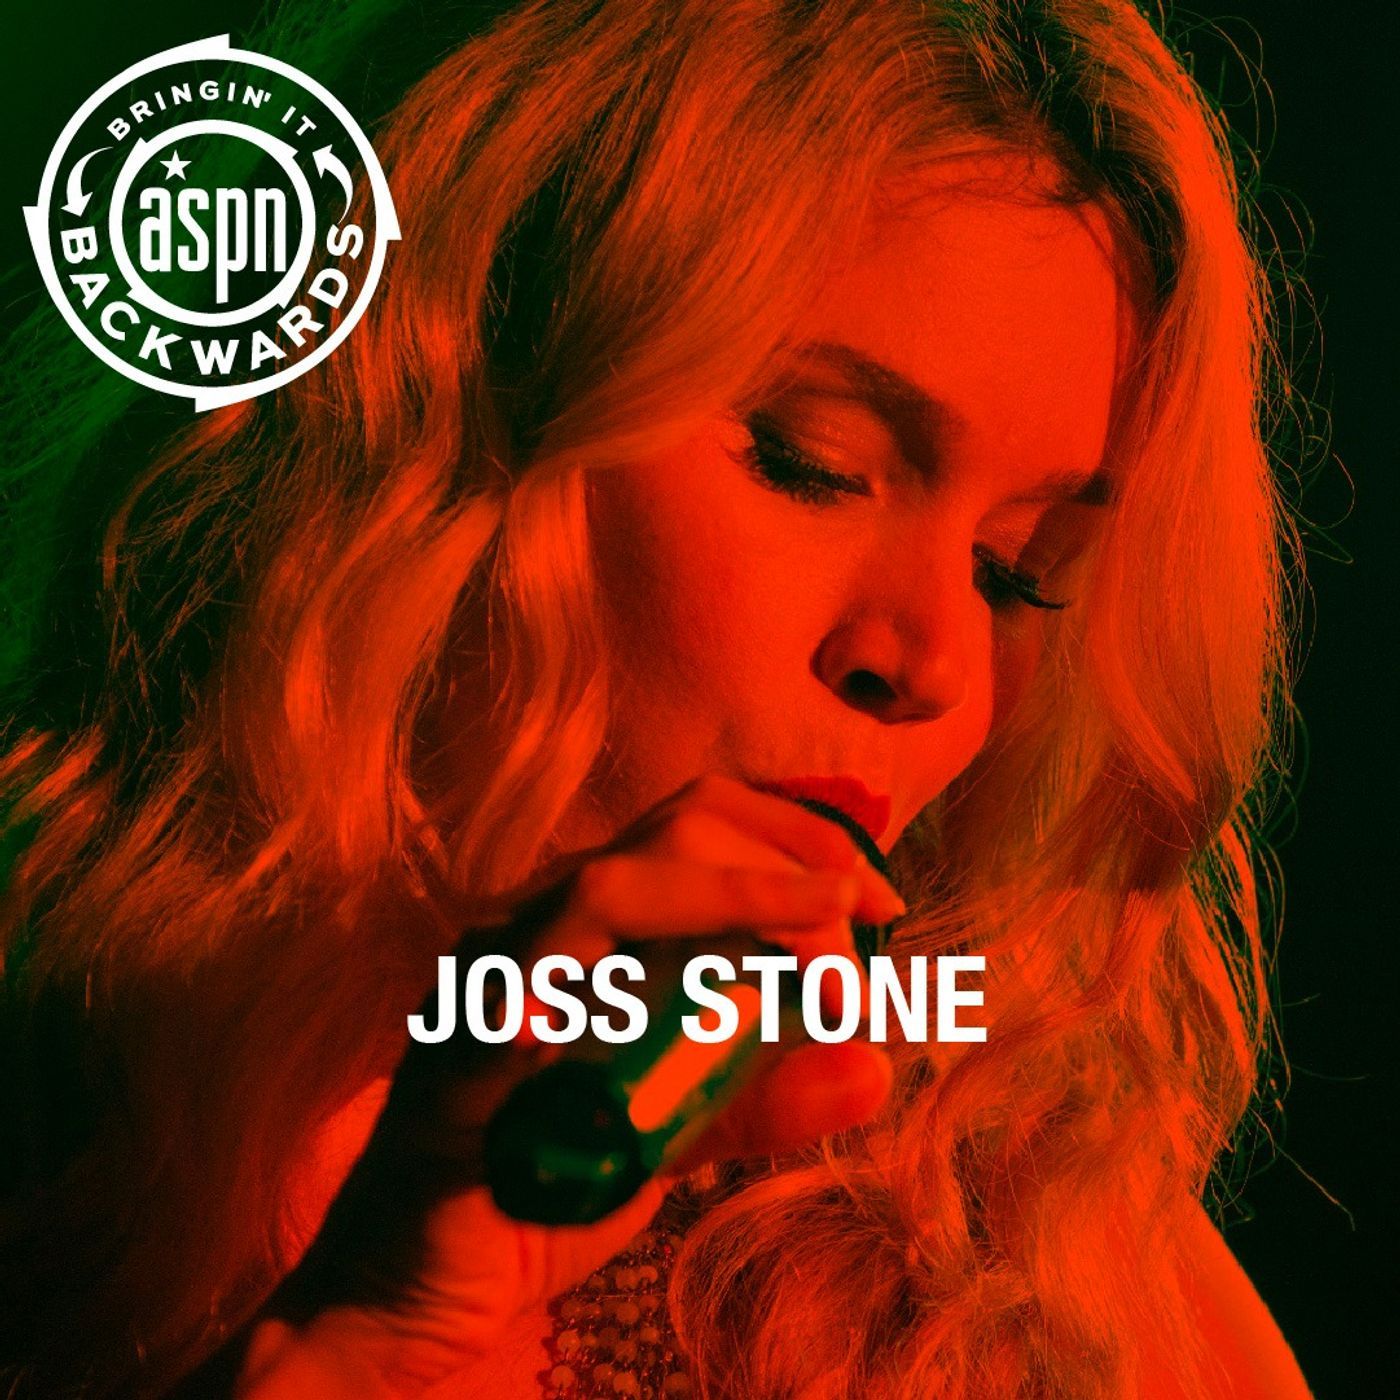 Interview with Joss Stone Image